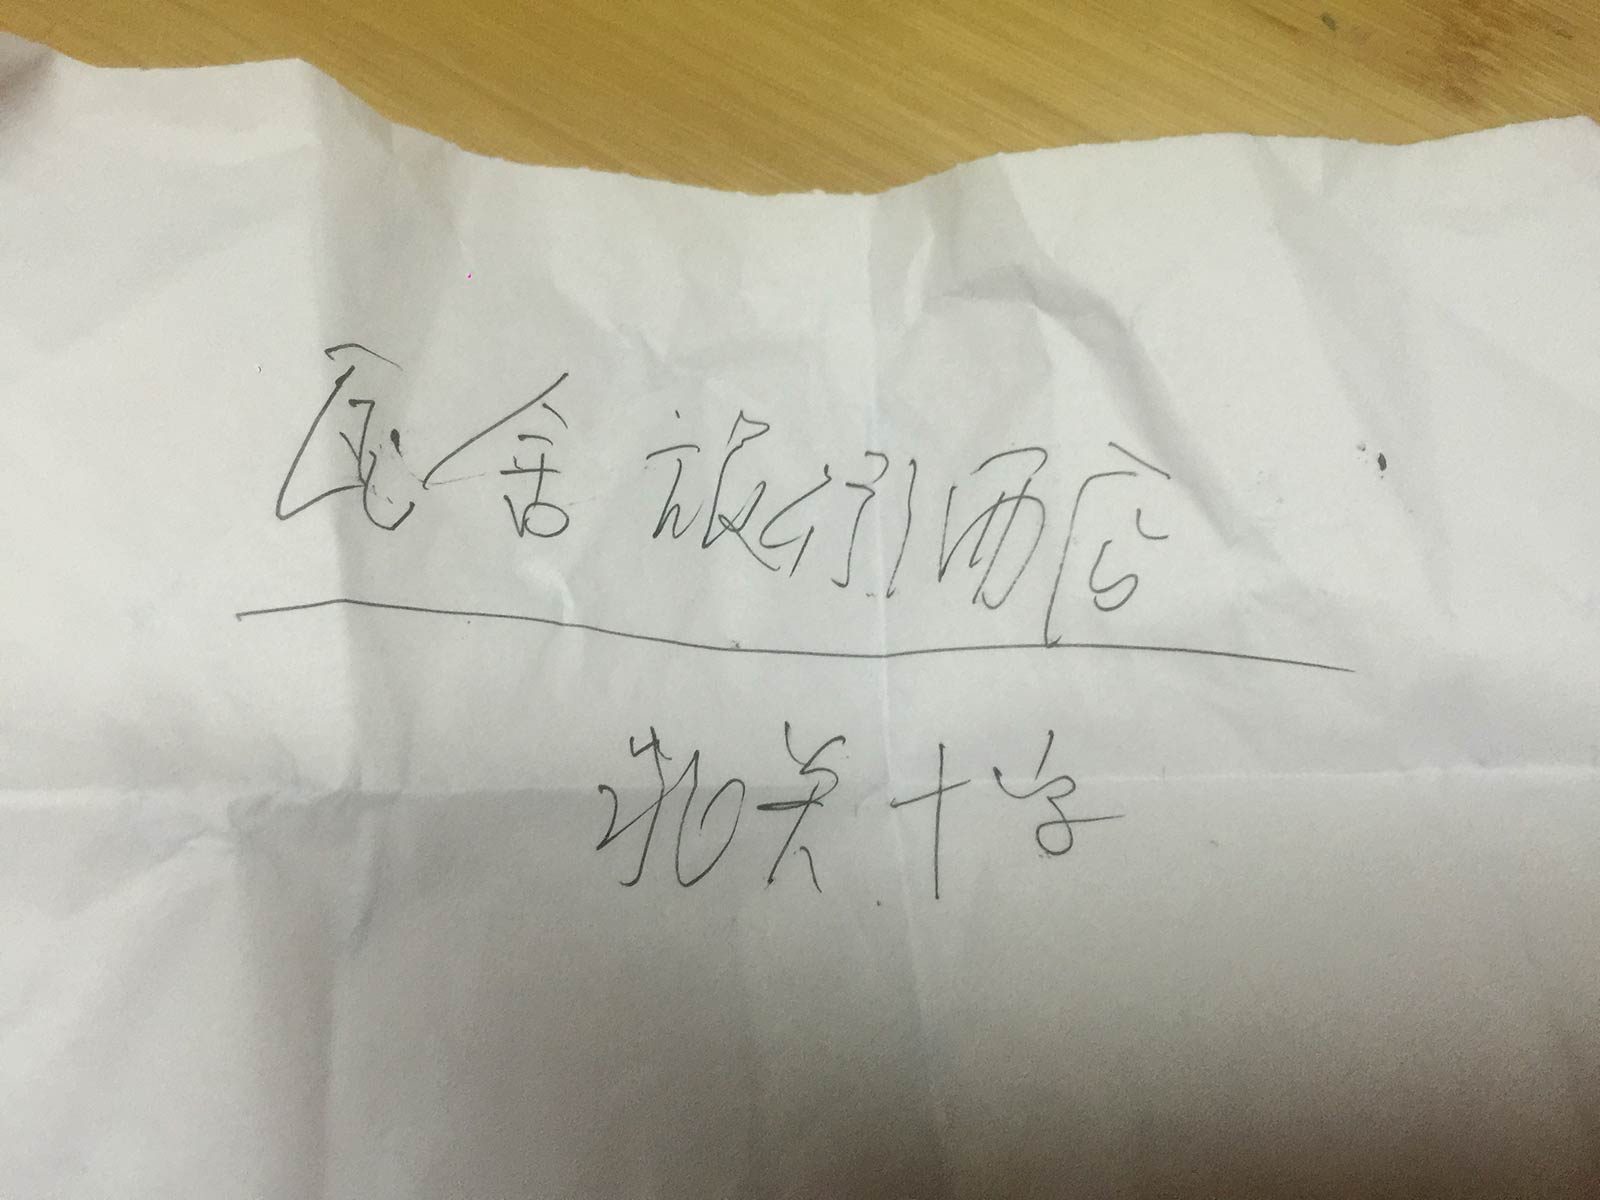 Hostel address written in Chinese in Xi'an, China. Getting lost in Xi'an